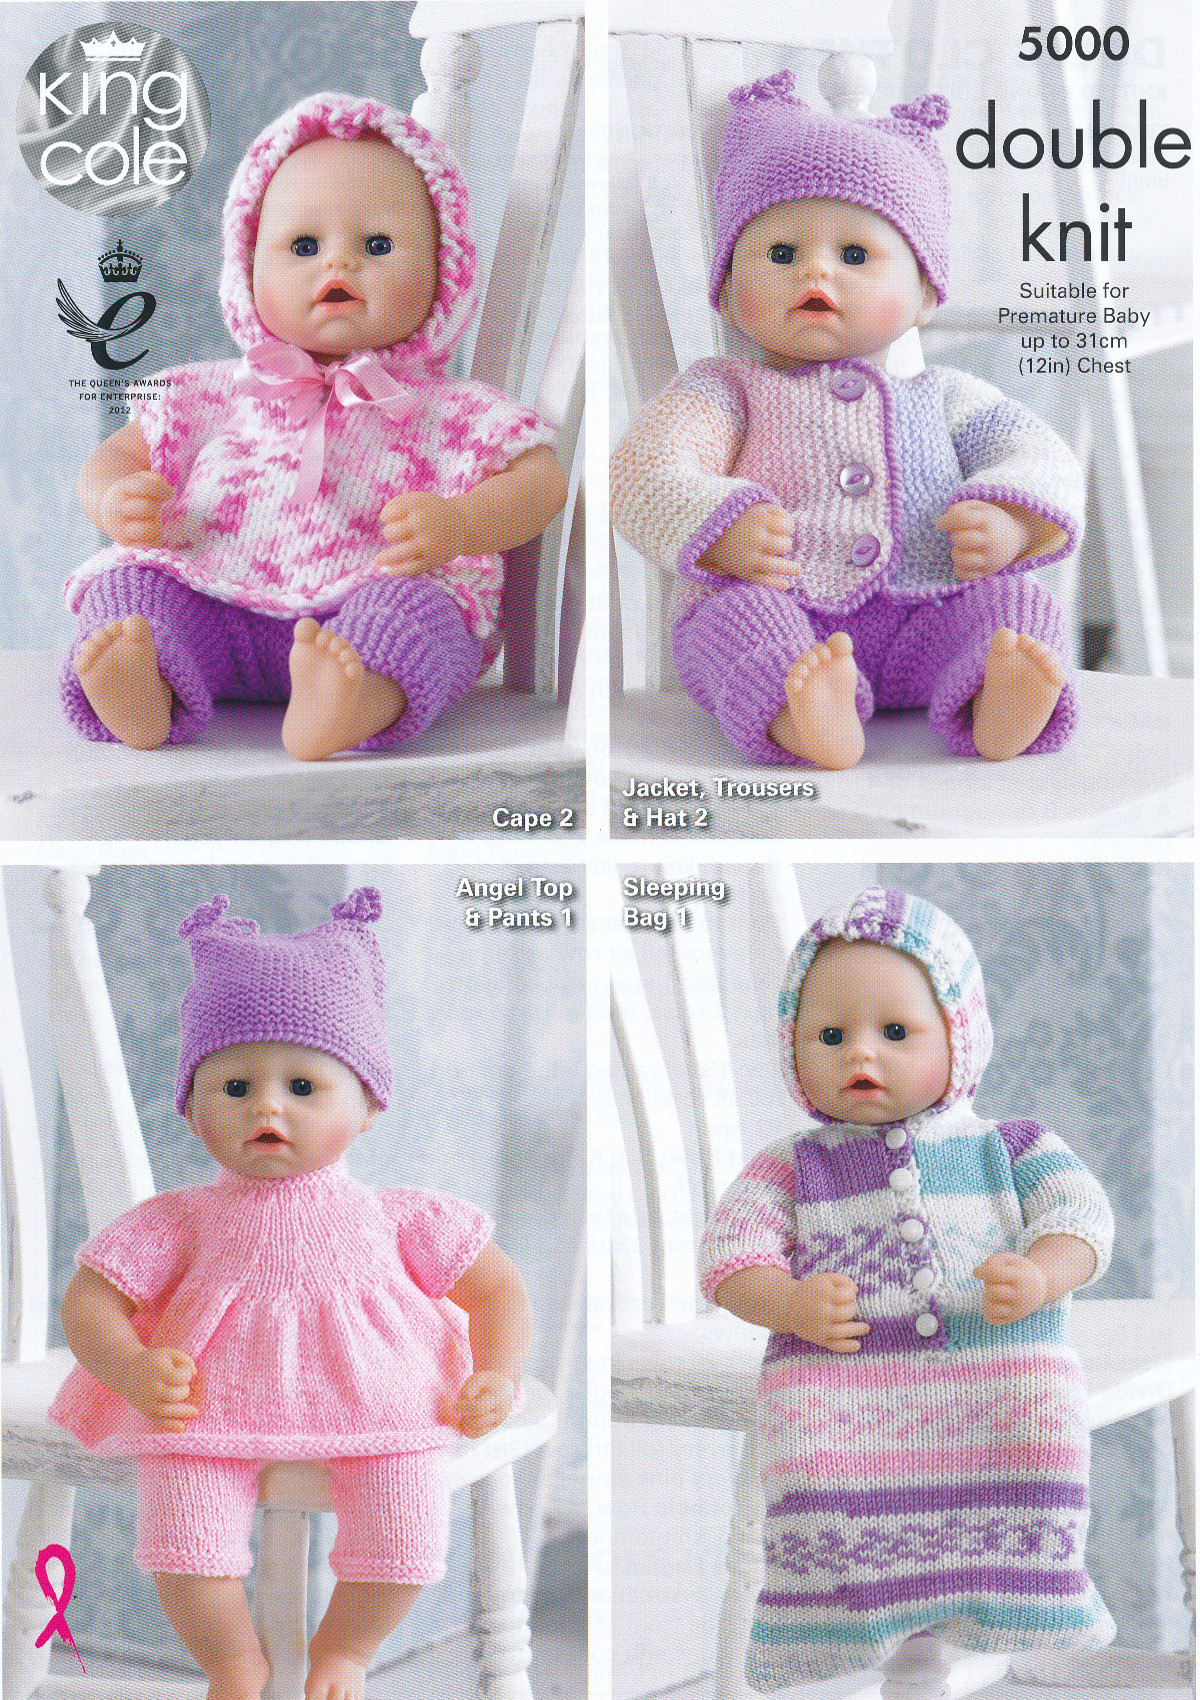 Knitting Patterns For Baby Dolls Clothes Details About King Cole Double Knitting Dk Pattern For Premature Ba Or Dolls Clothes 5000